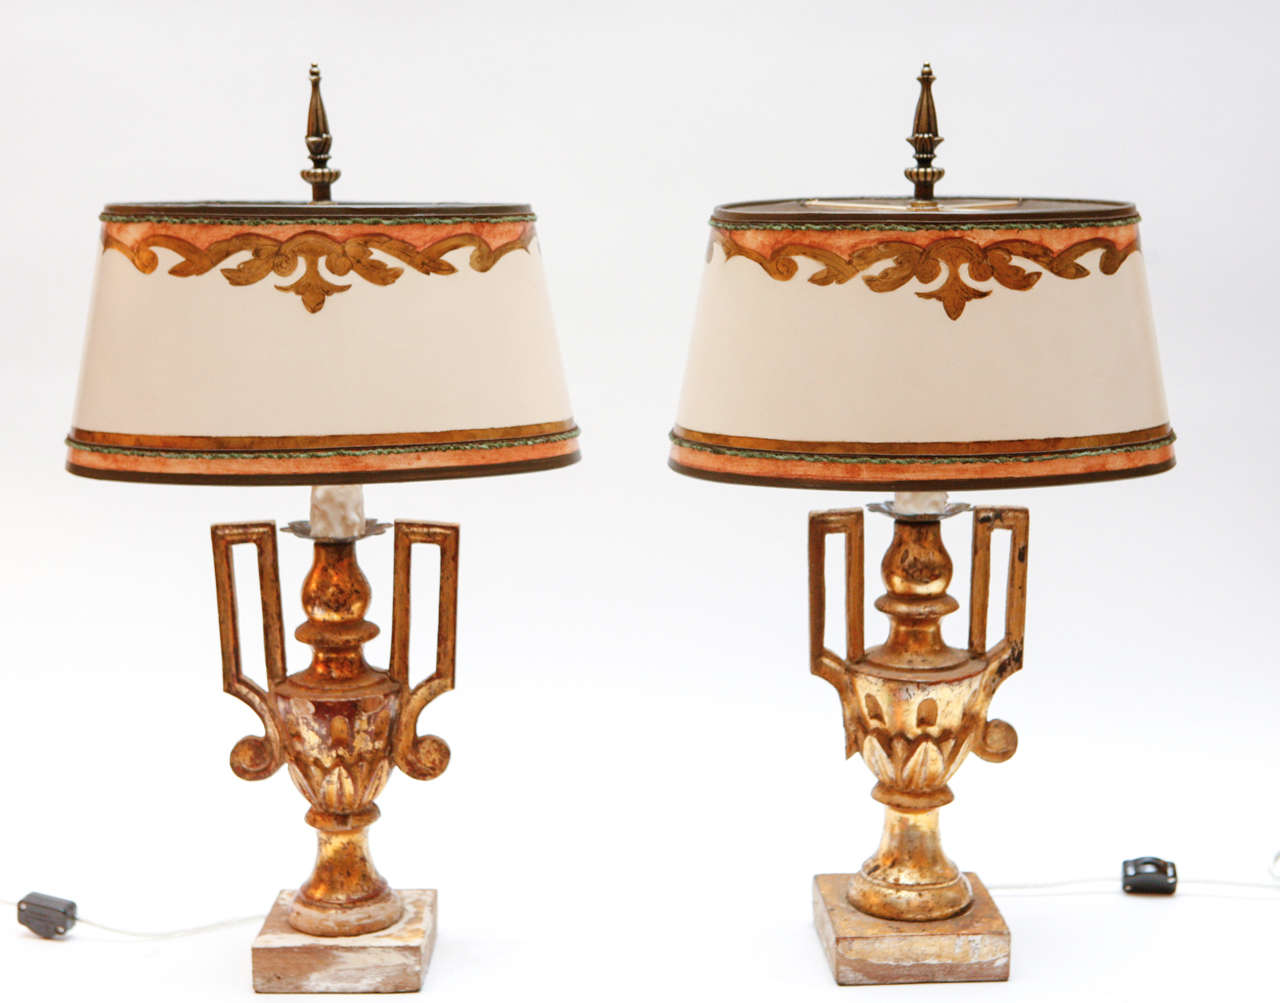 Pair of early 19th c. Italian Giltwood Urns converted to lamps. The Shades are included and are Hand Made of Parchment Paper. They are Hand Gilded and Decorated. The lamps have been newly wired. The measurement to the top of the finial is 21.5